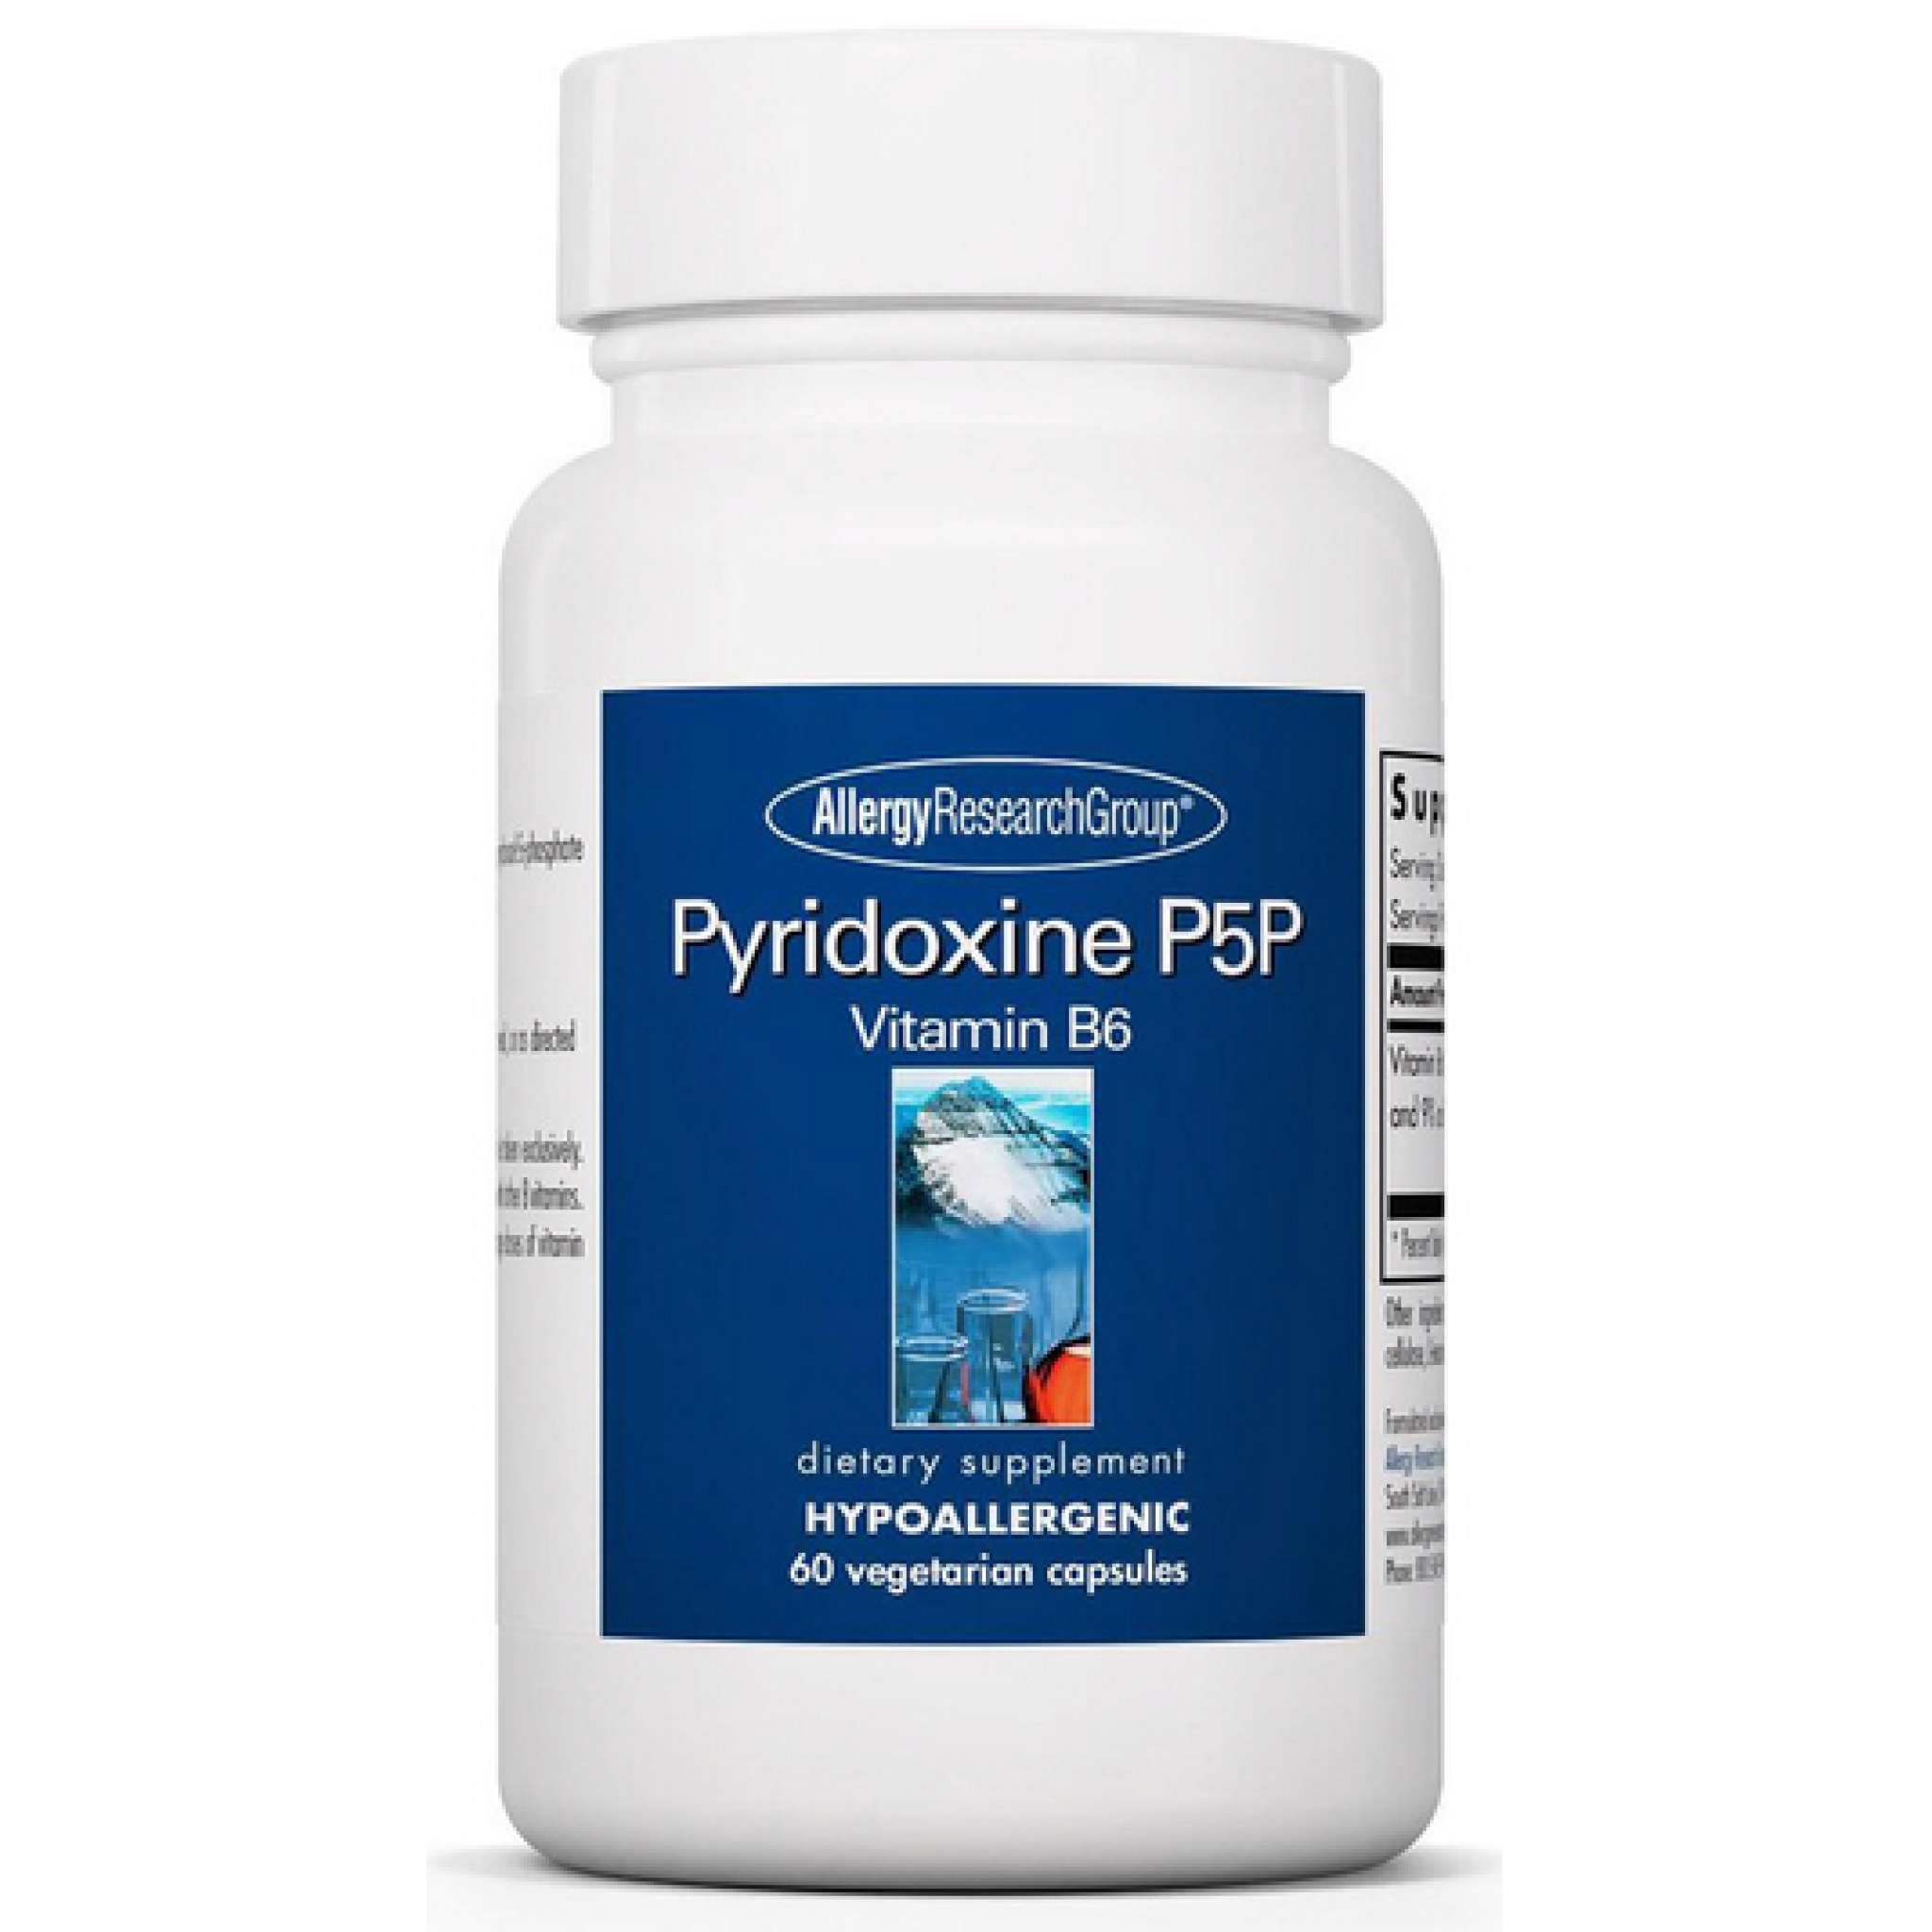 Allergy Research Group - P 5 P Pyridoxine